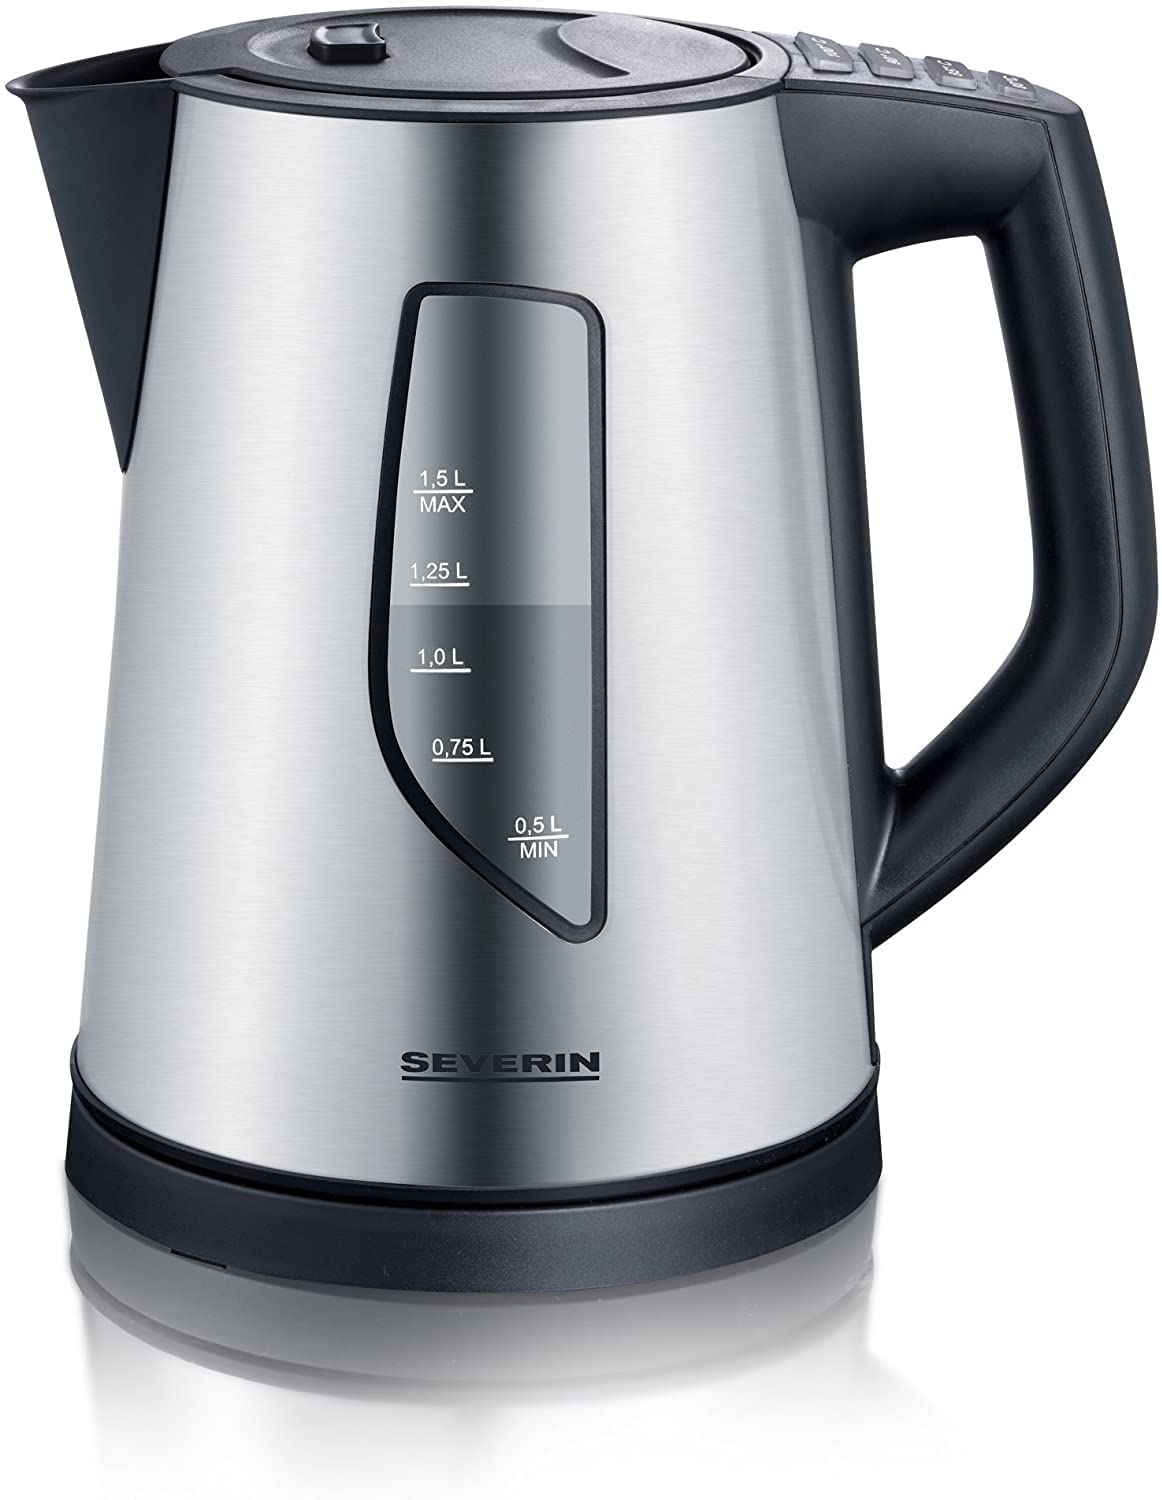 Severin WK 3342 Kettle / 1.5 L capacity / 2200 watts / stainless steel case / stainless steel brushed-black